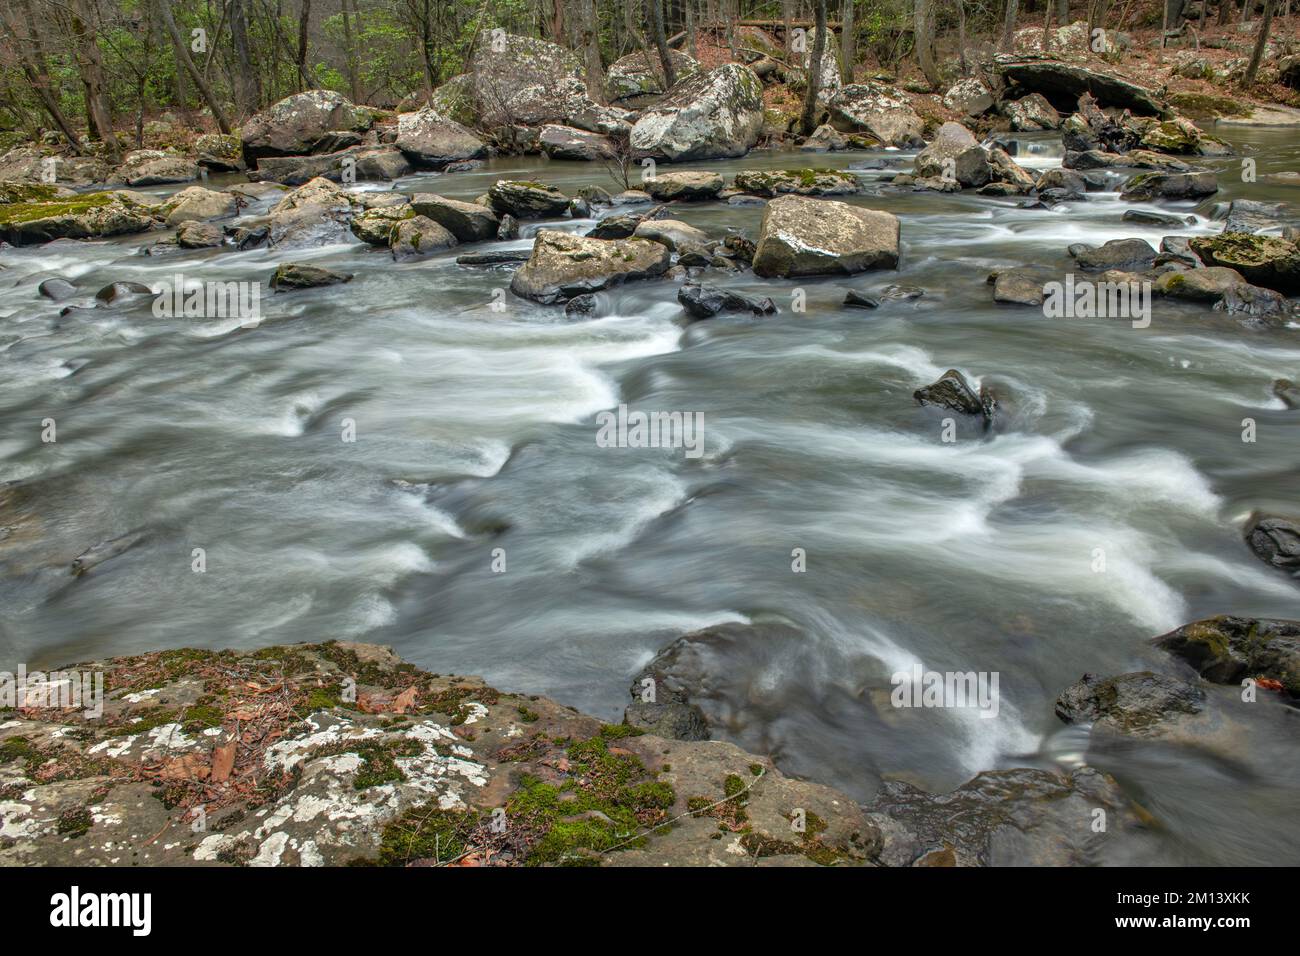 Water flowing through a rocky creek in Cumberland Mountain Tennessee shows the peaceful, surreal tone of being in the wilderness. Stock Photo